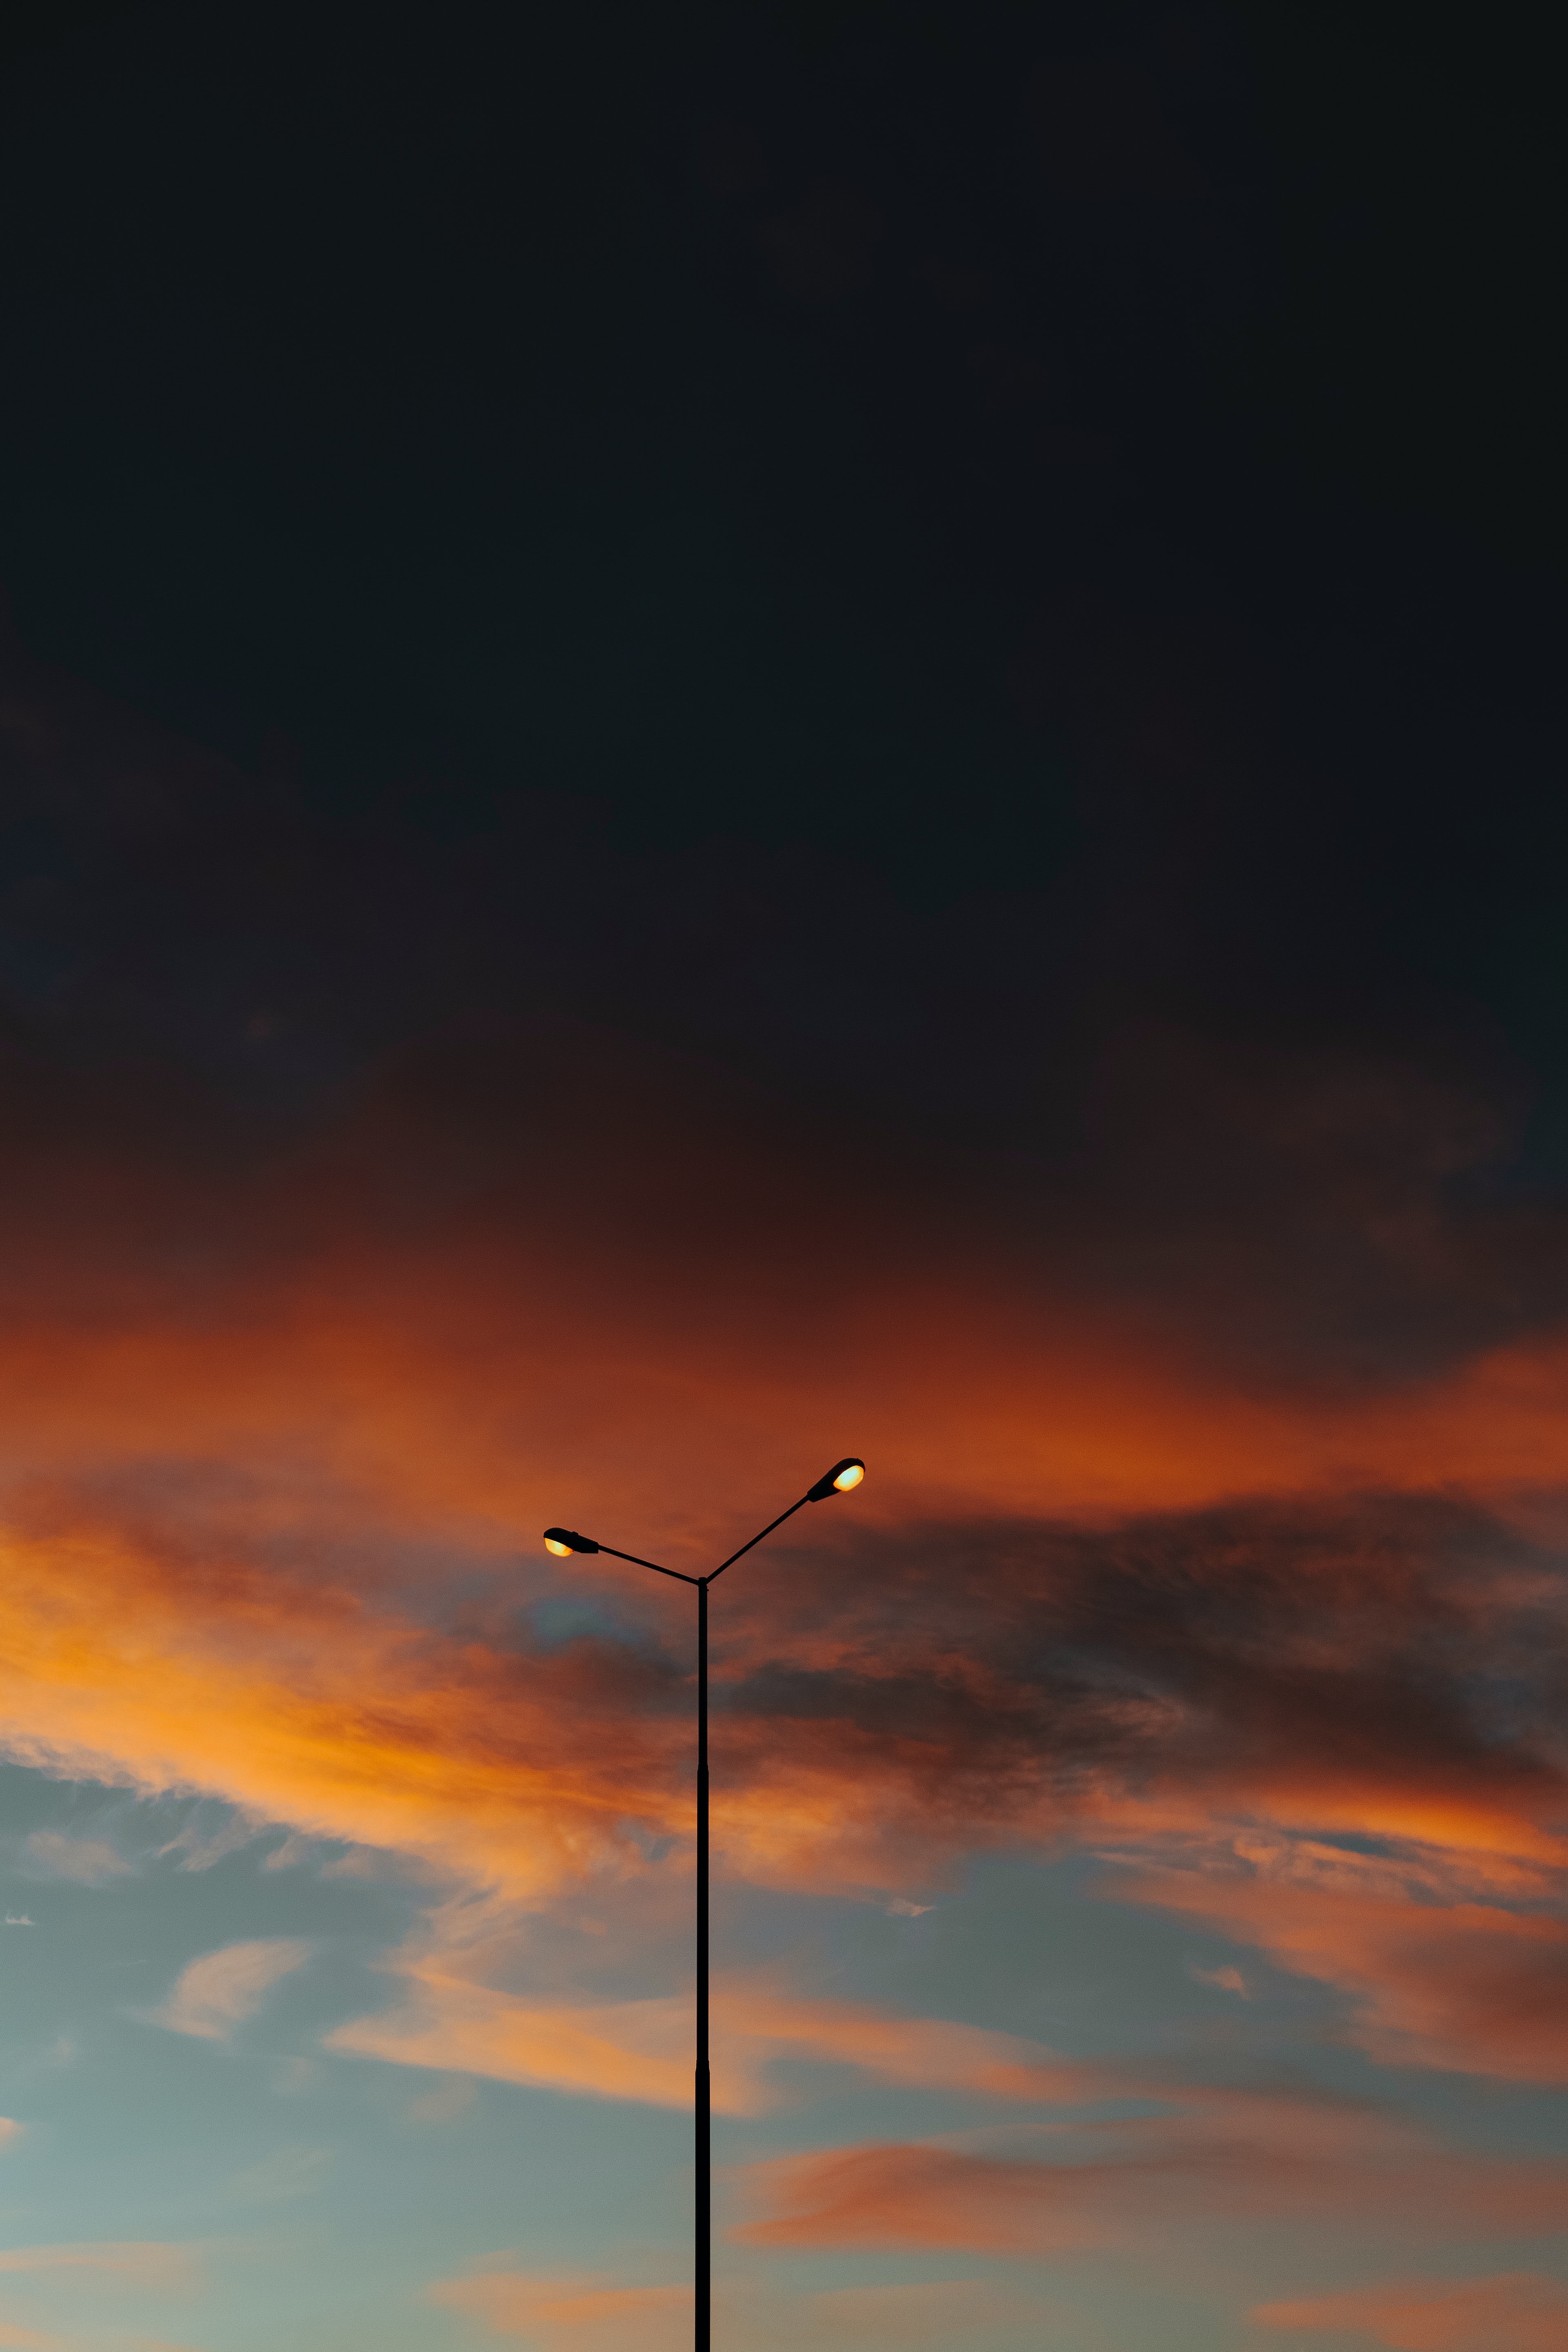 android twilight, clouds, miscellanea, miscellaneous, dusk, evening, lamp post, lamppost